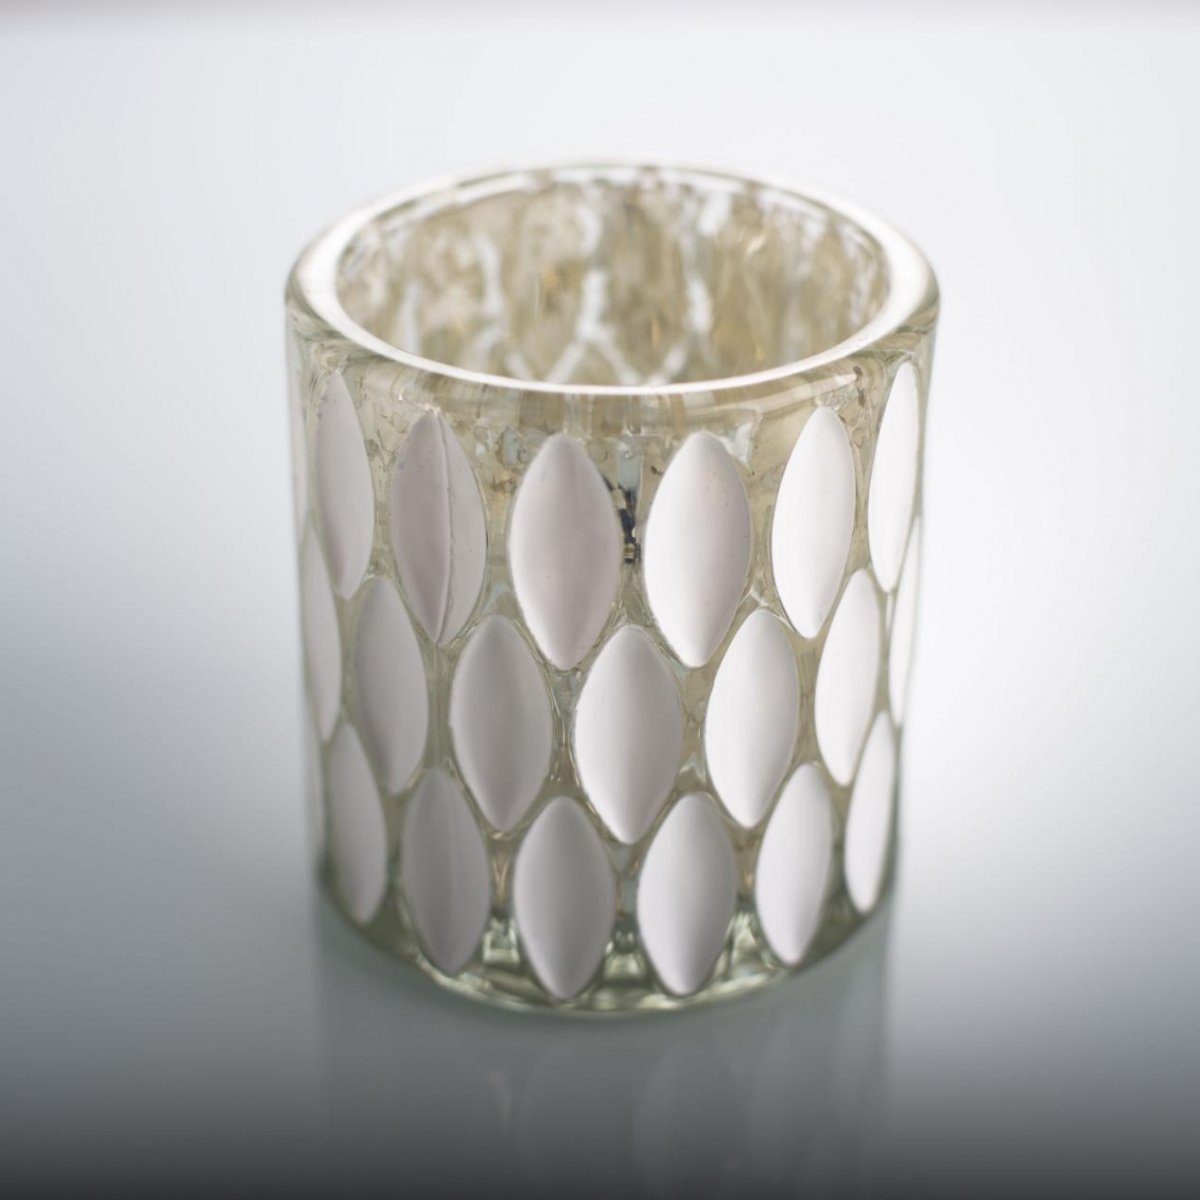 Glass Candle Holder :Dot Gold Electroplate ,Polish White ,Geometric Leaf Embossing ,Christmas Home Decoration ,China Factory ,Wholesale Price-HOWCANDLE-Candles,Scented Candles,Aromatherapy Candles,Soy Candles,Vegan Candles,Jar Candles,Pillar Candles,Candle Gift Sets,Essential Oils,Reed Diffuser,Candle Holder,